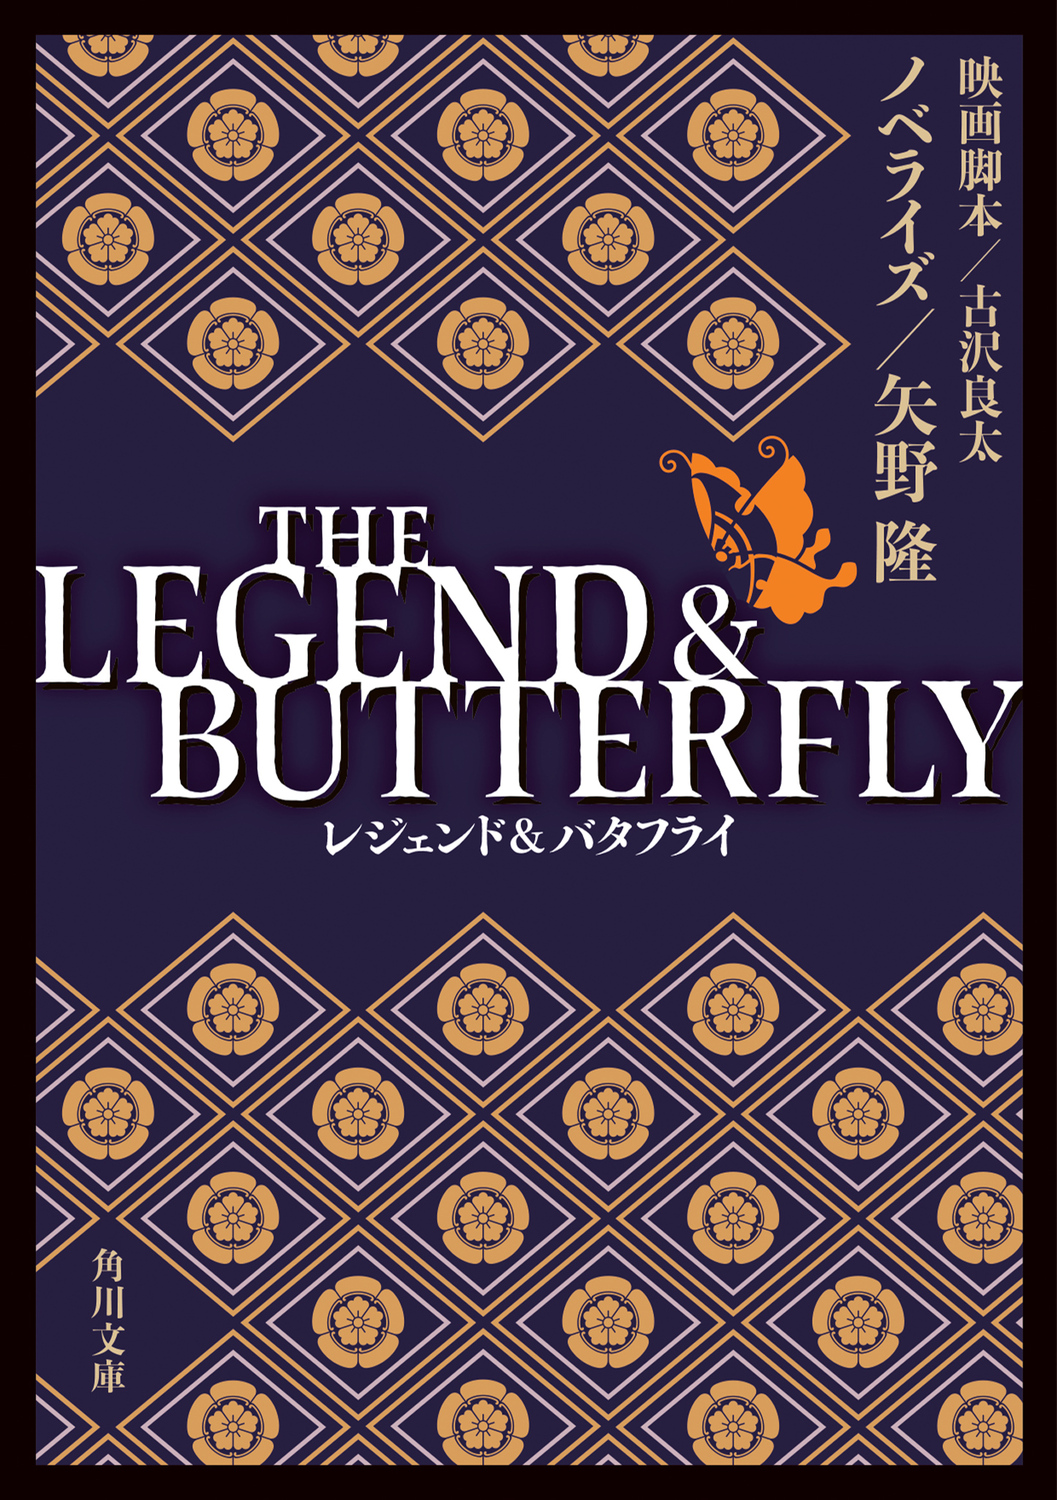 THE LEGEND ＆ BUTTERFLYの商品画像